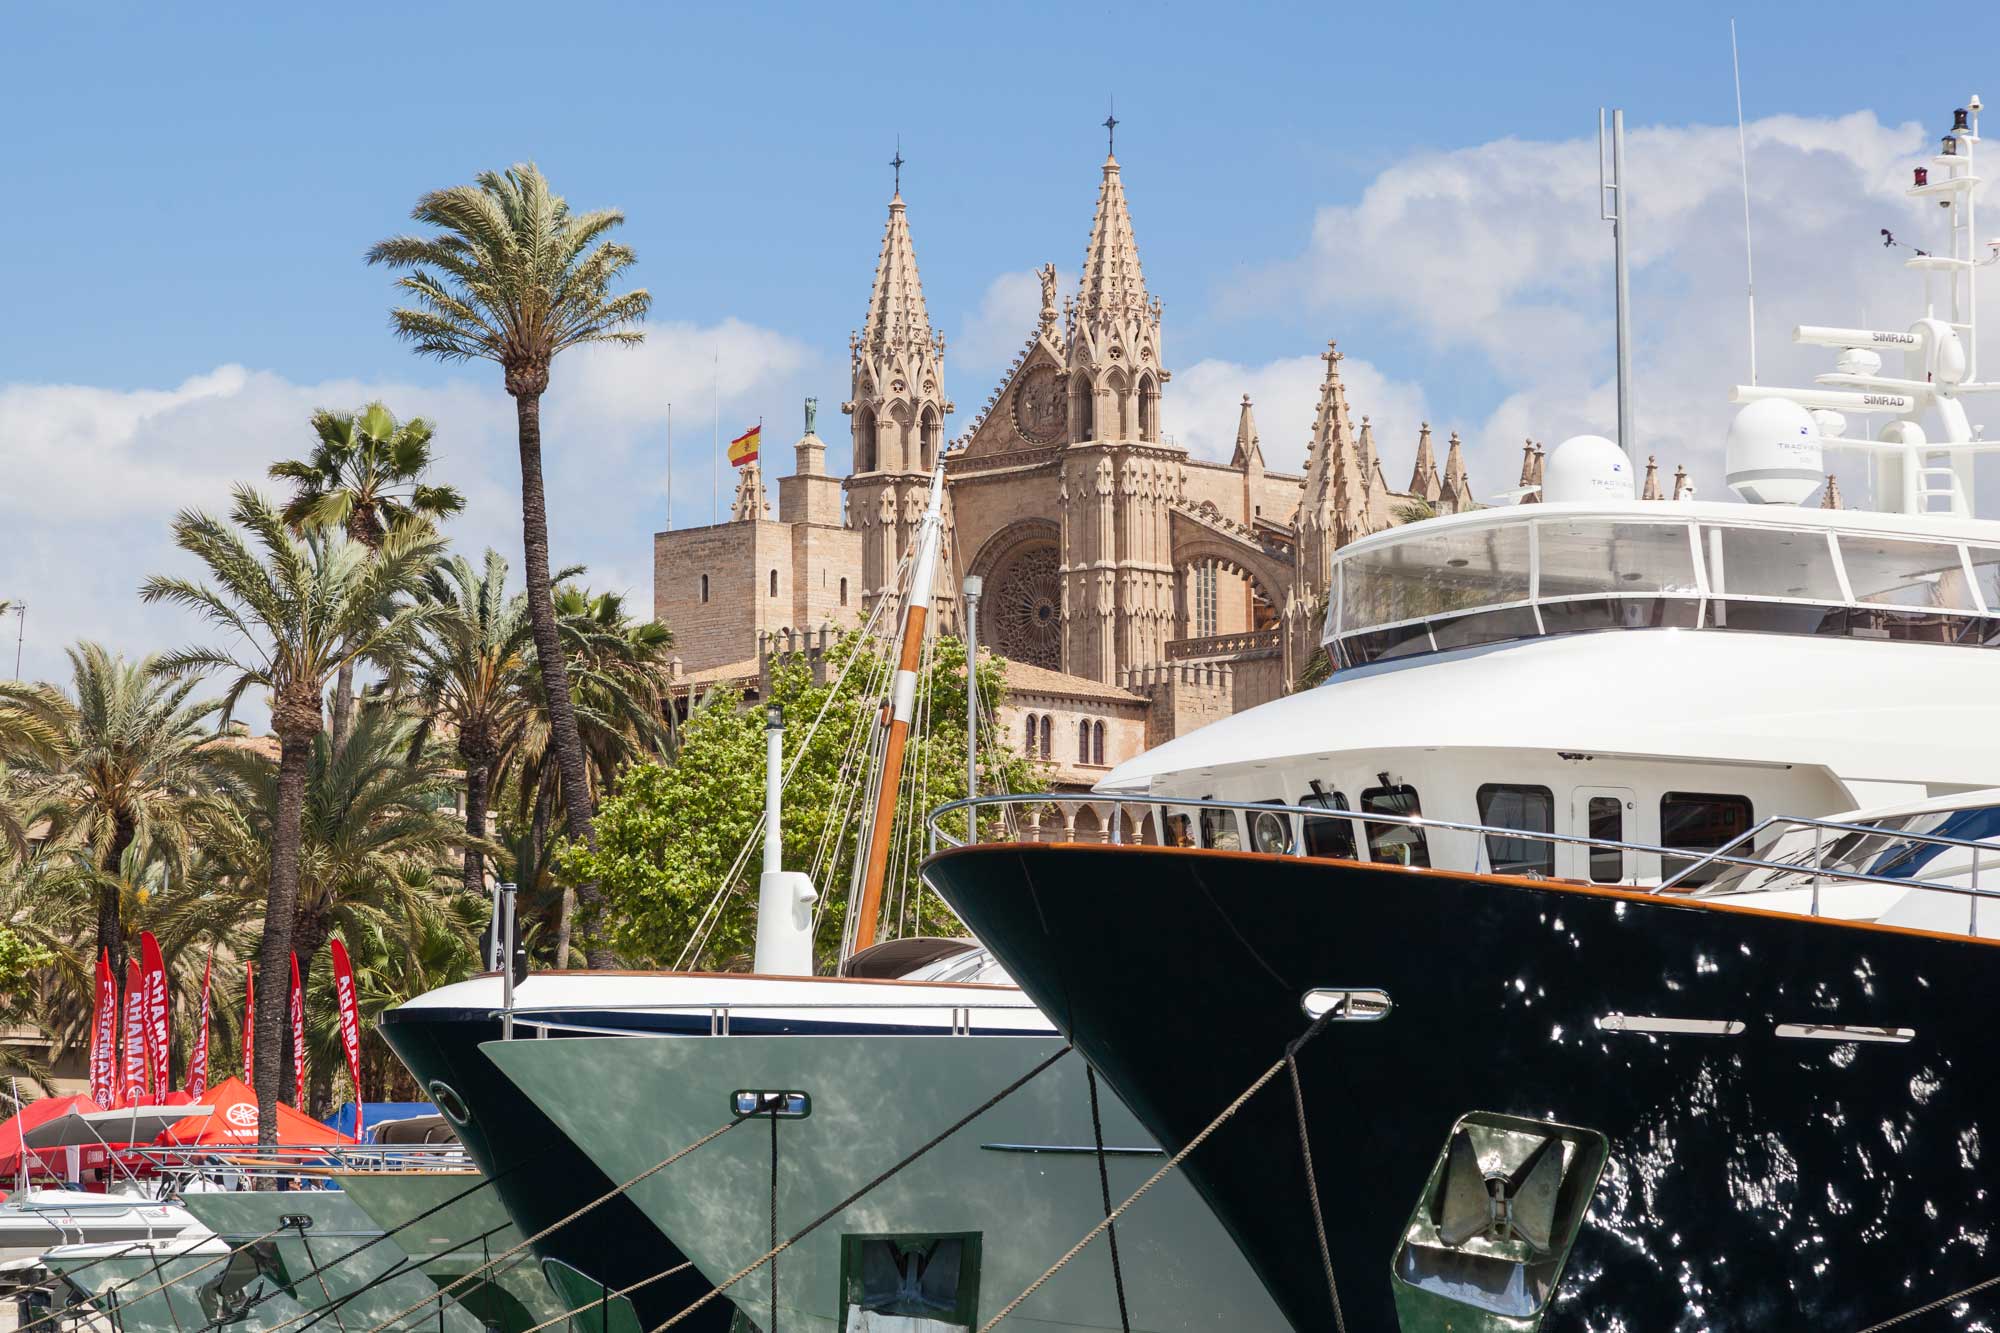 Slight decline in registrations in the Balearic boat market this year